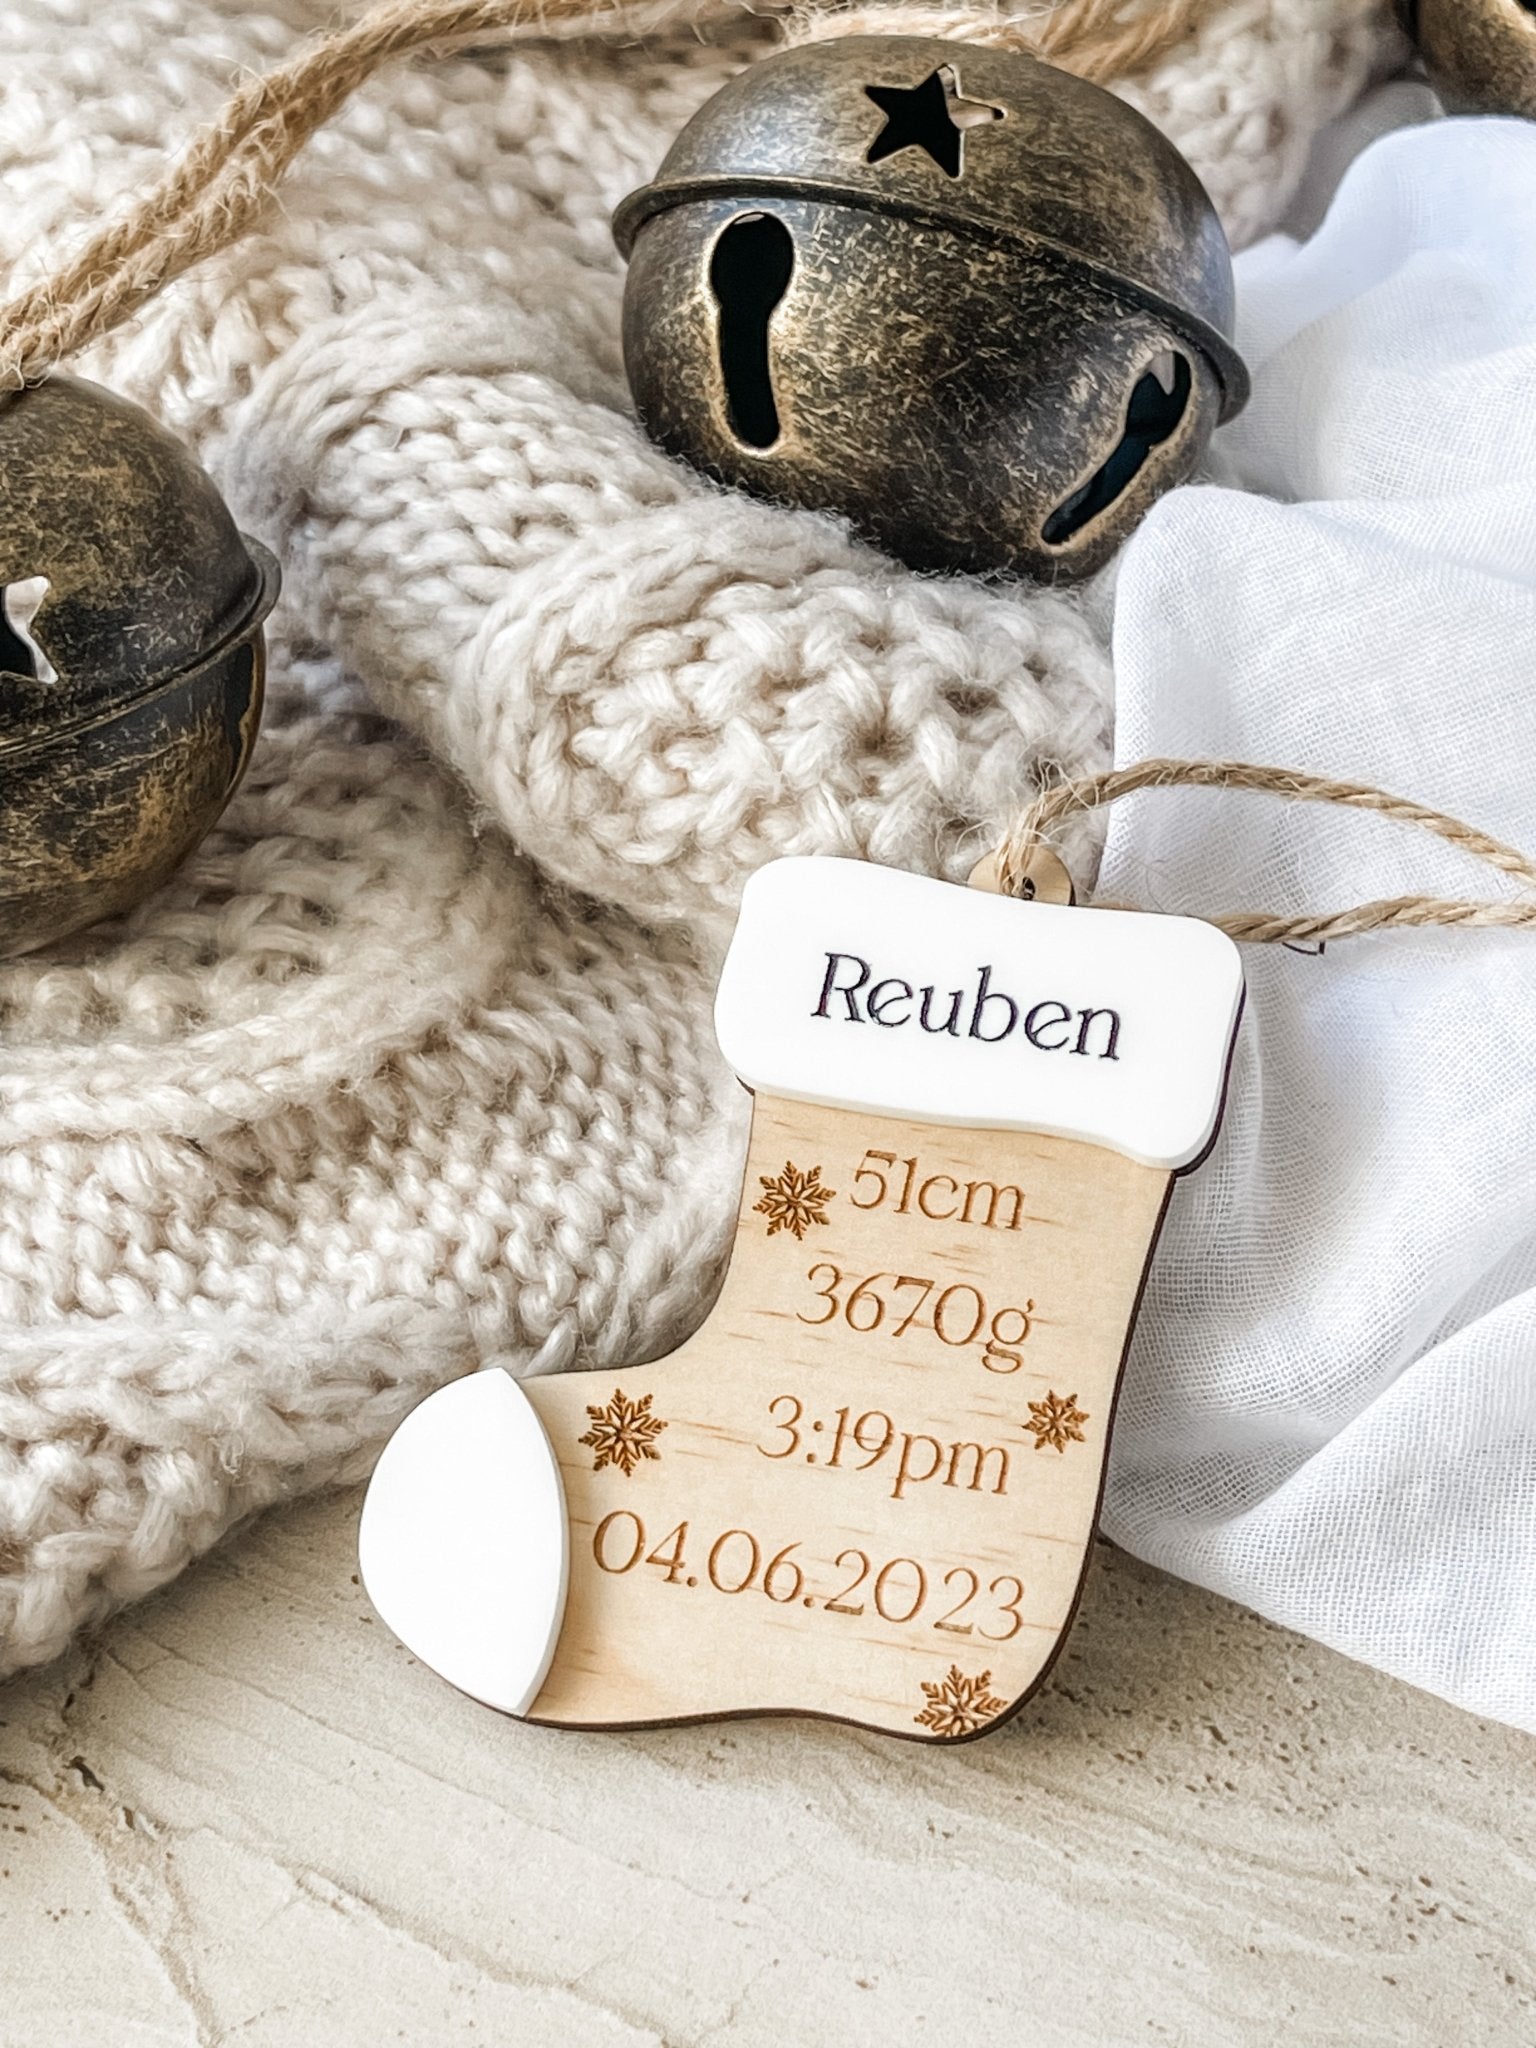 Baby's Birth Details Stocking Ornament - The Humble Gift Co.